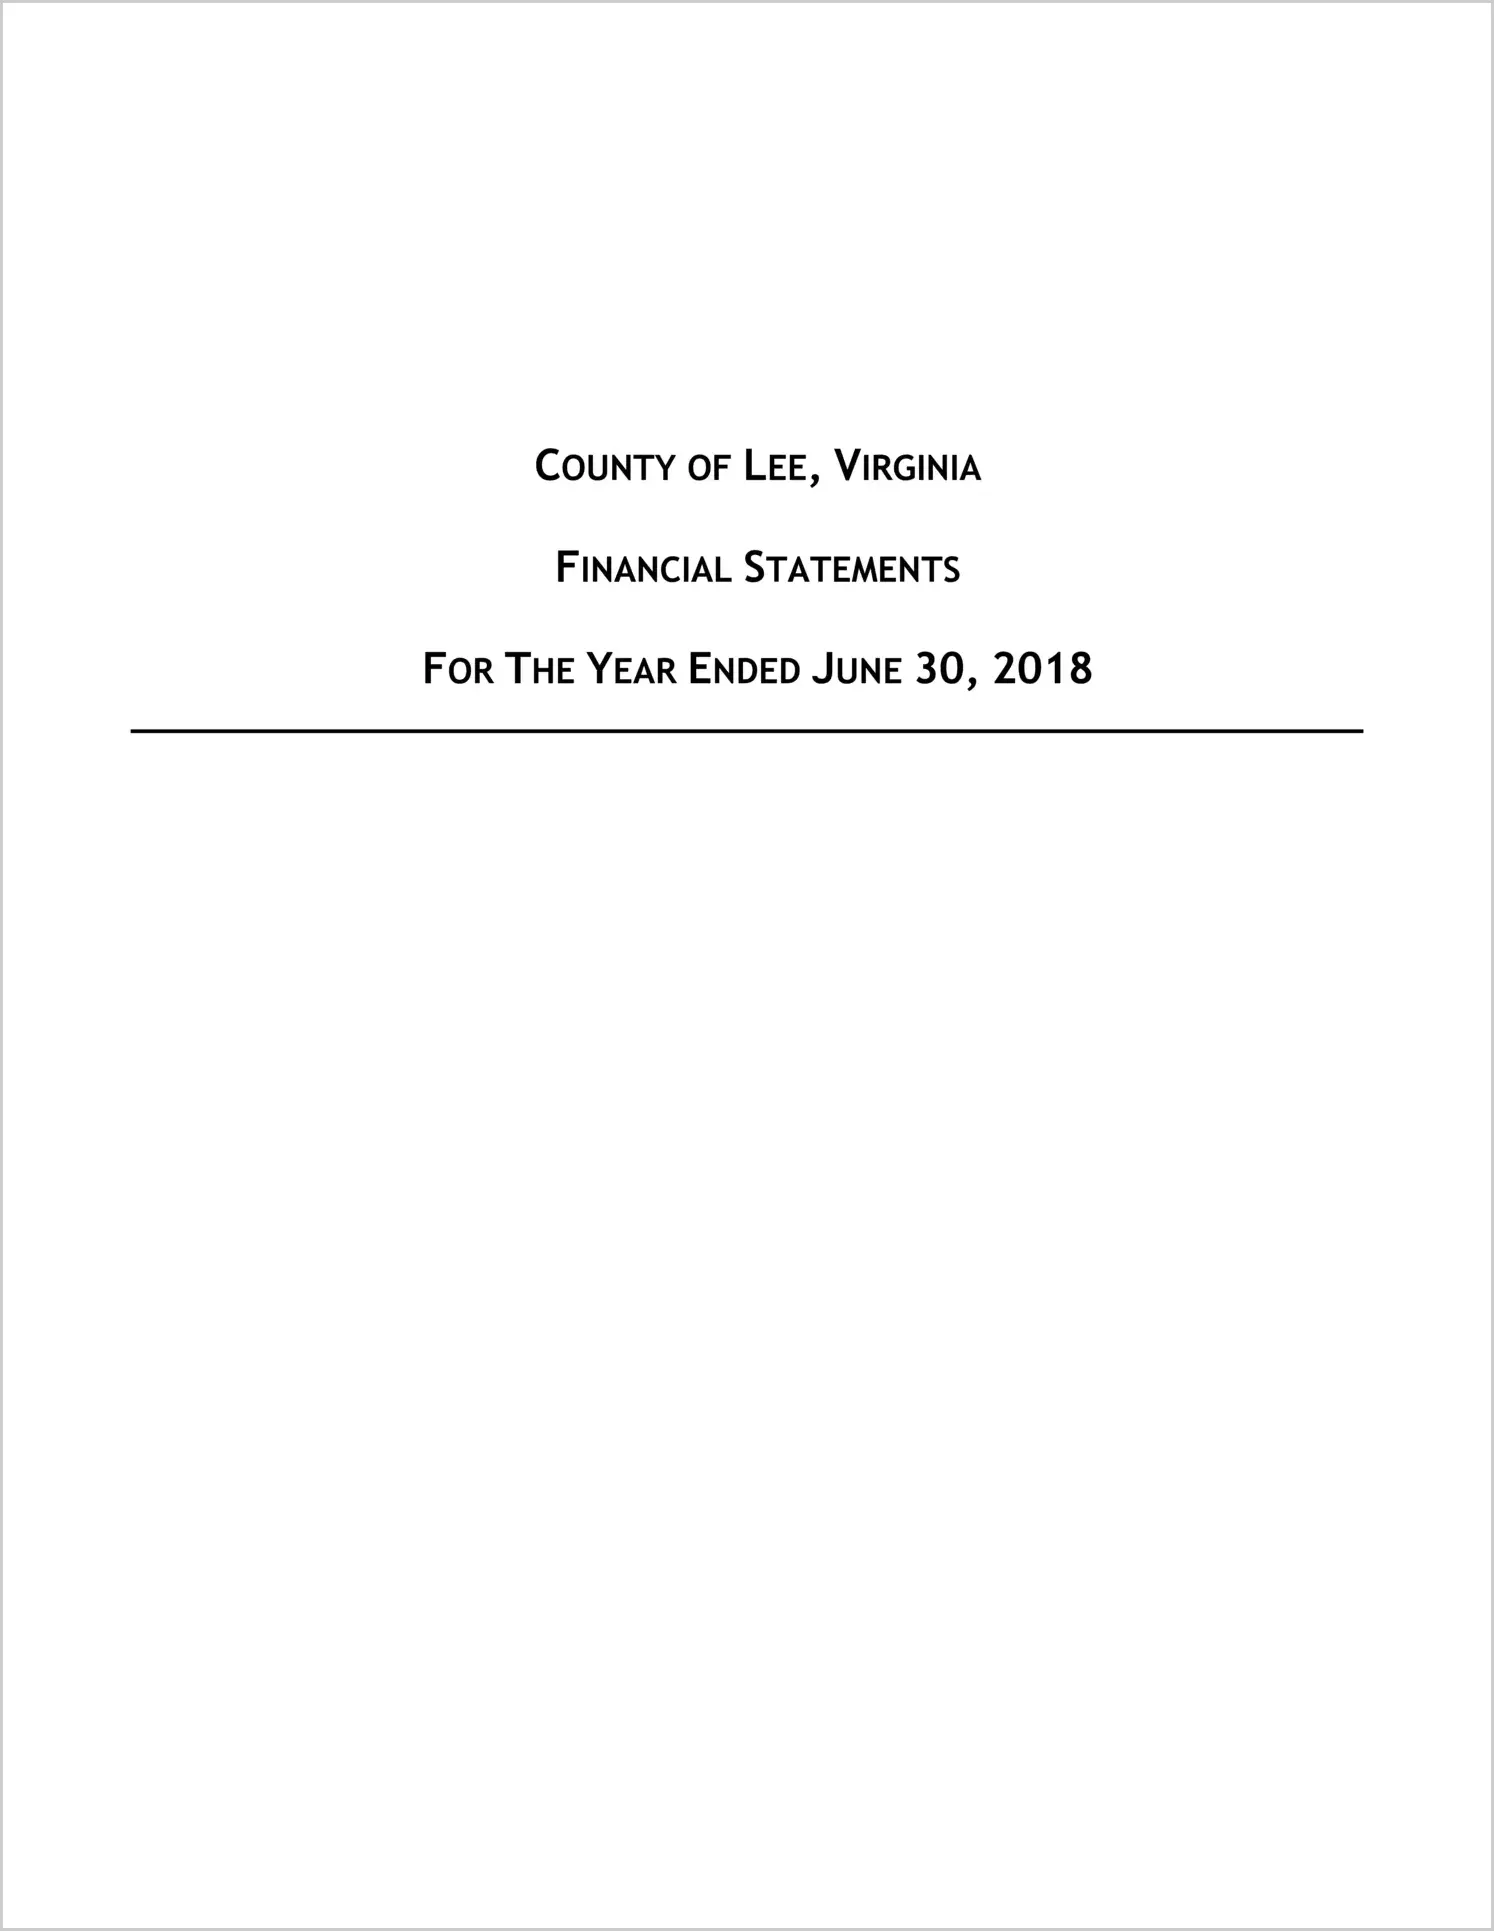 2018 Annual Financial Report for County of Lee